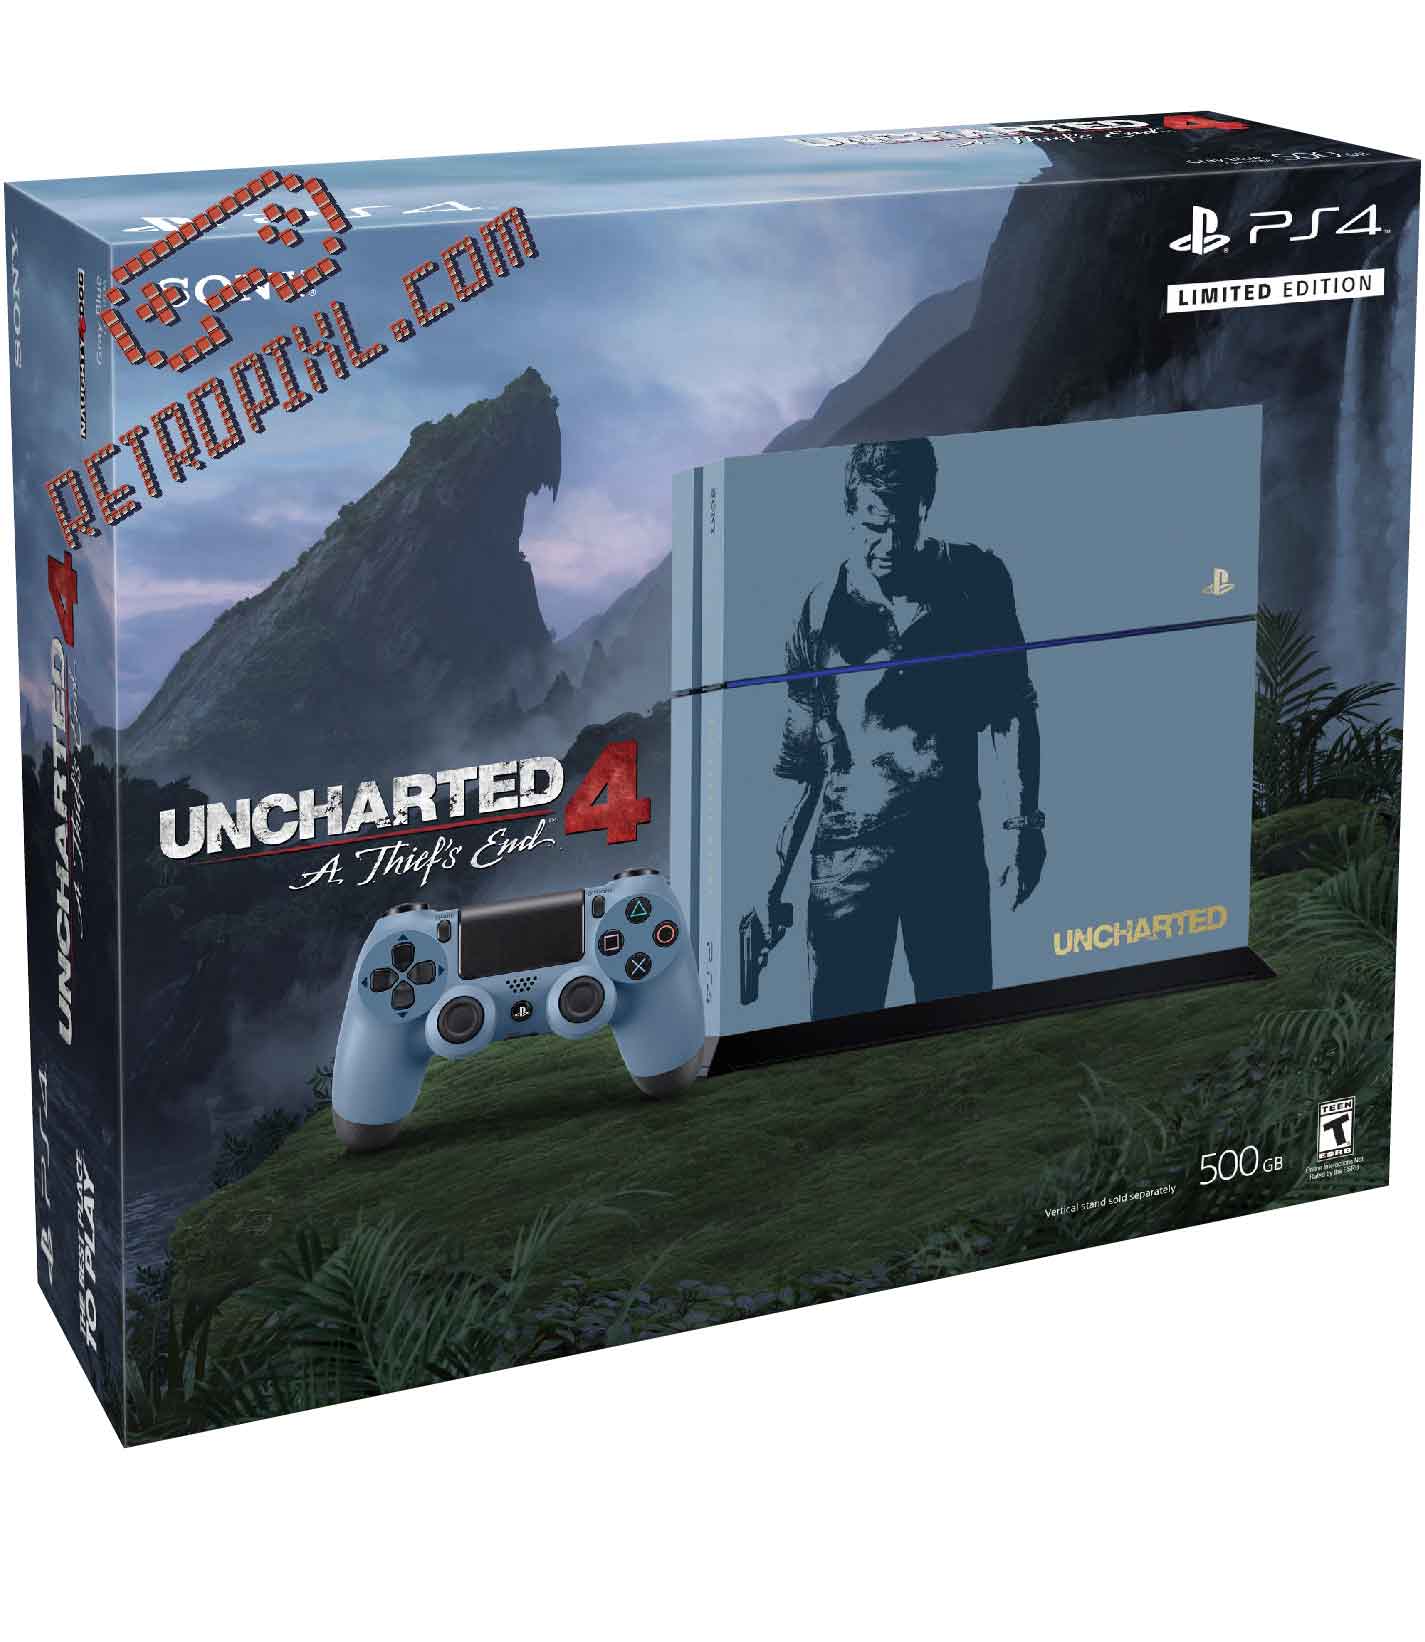 RetroPixl Sony Playstation 4 (PS4) Uncharted Limited Edition 